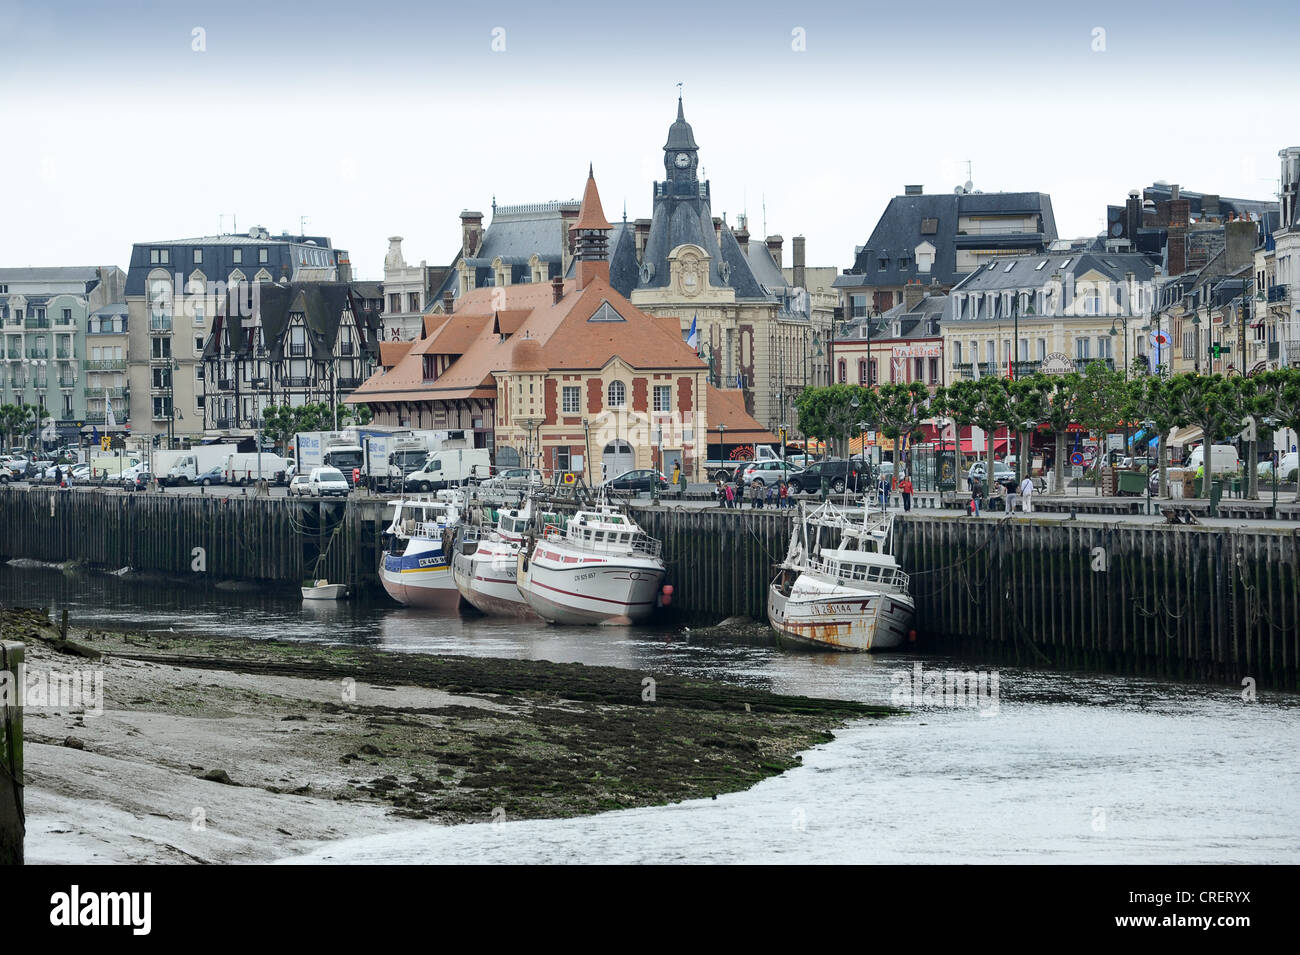 Trouville Normandy France Stock Photo